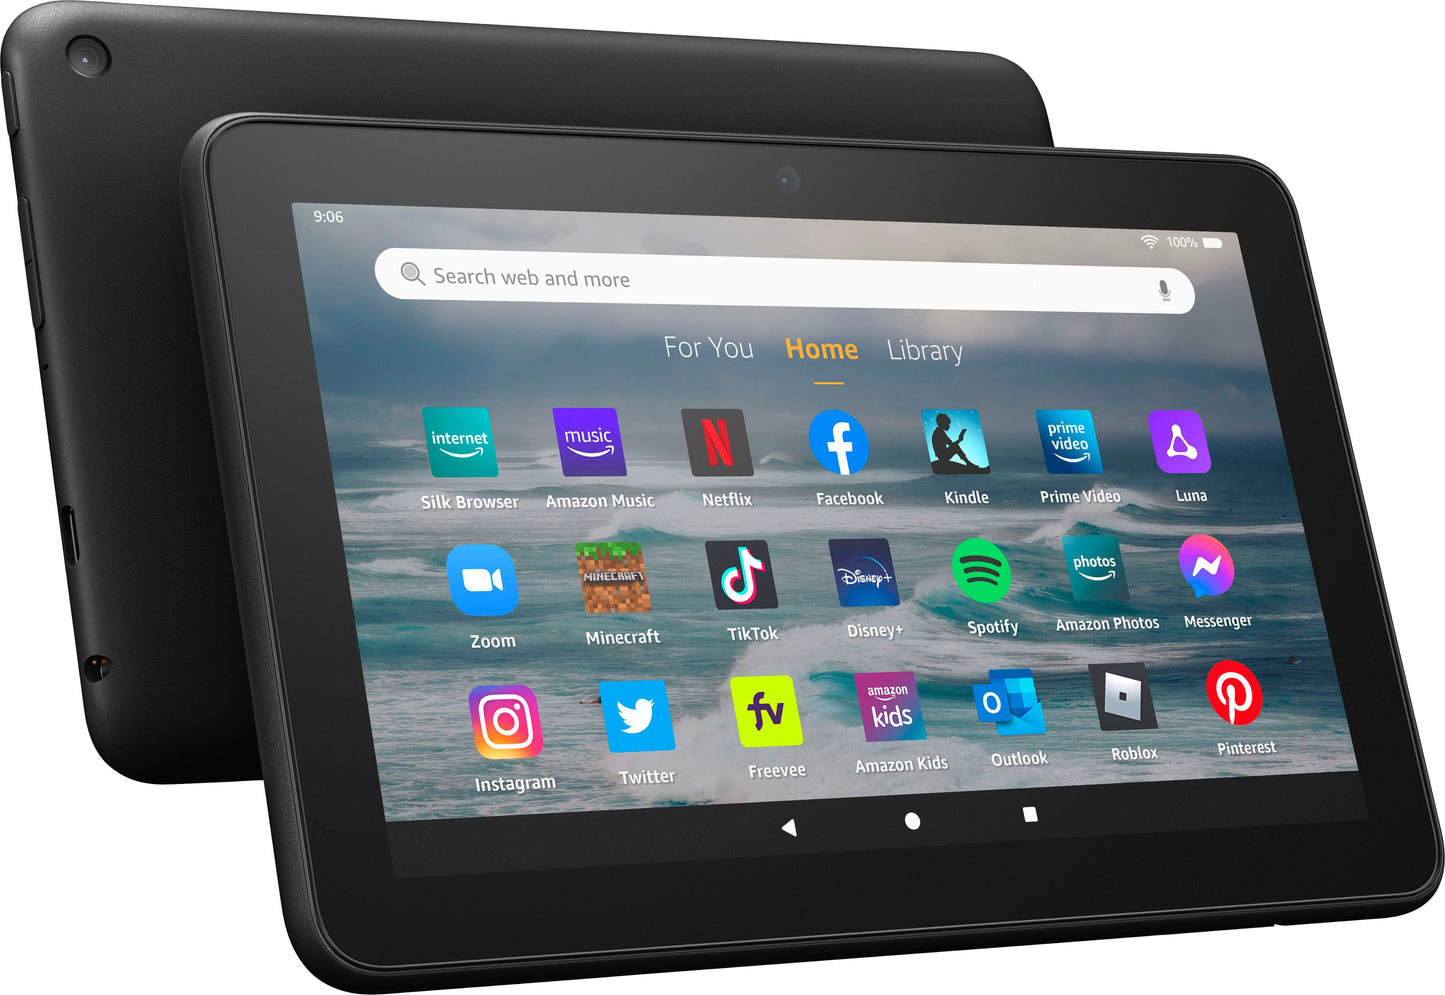 Amazon Fire 7 Tablet 7" Touchscreen 16GB